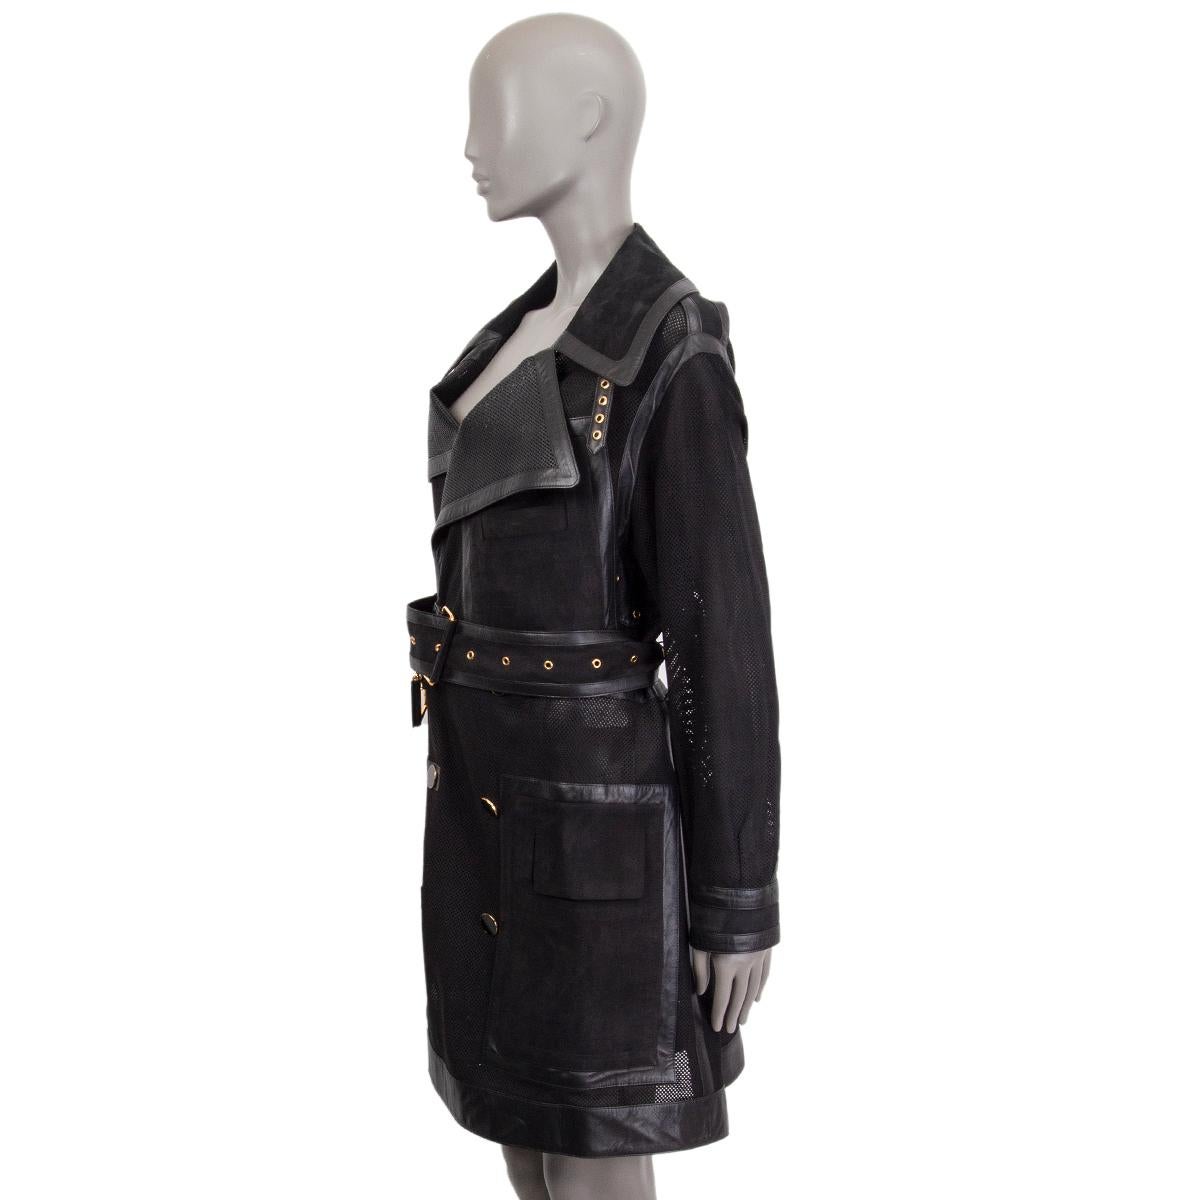 Tom Ford belted coat in black perforated nappa leather, nubuk and lambskin featuring gold-tone hardware. Unlined. Has been worn and is in excellent condition. 

Tag Size 34
Size XXS
Shoulder Width 90cm (35.1in)
Bust To 94cm (36.7in)
Waist To 110cm